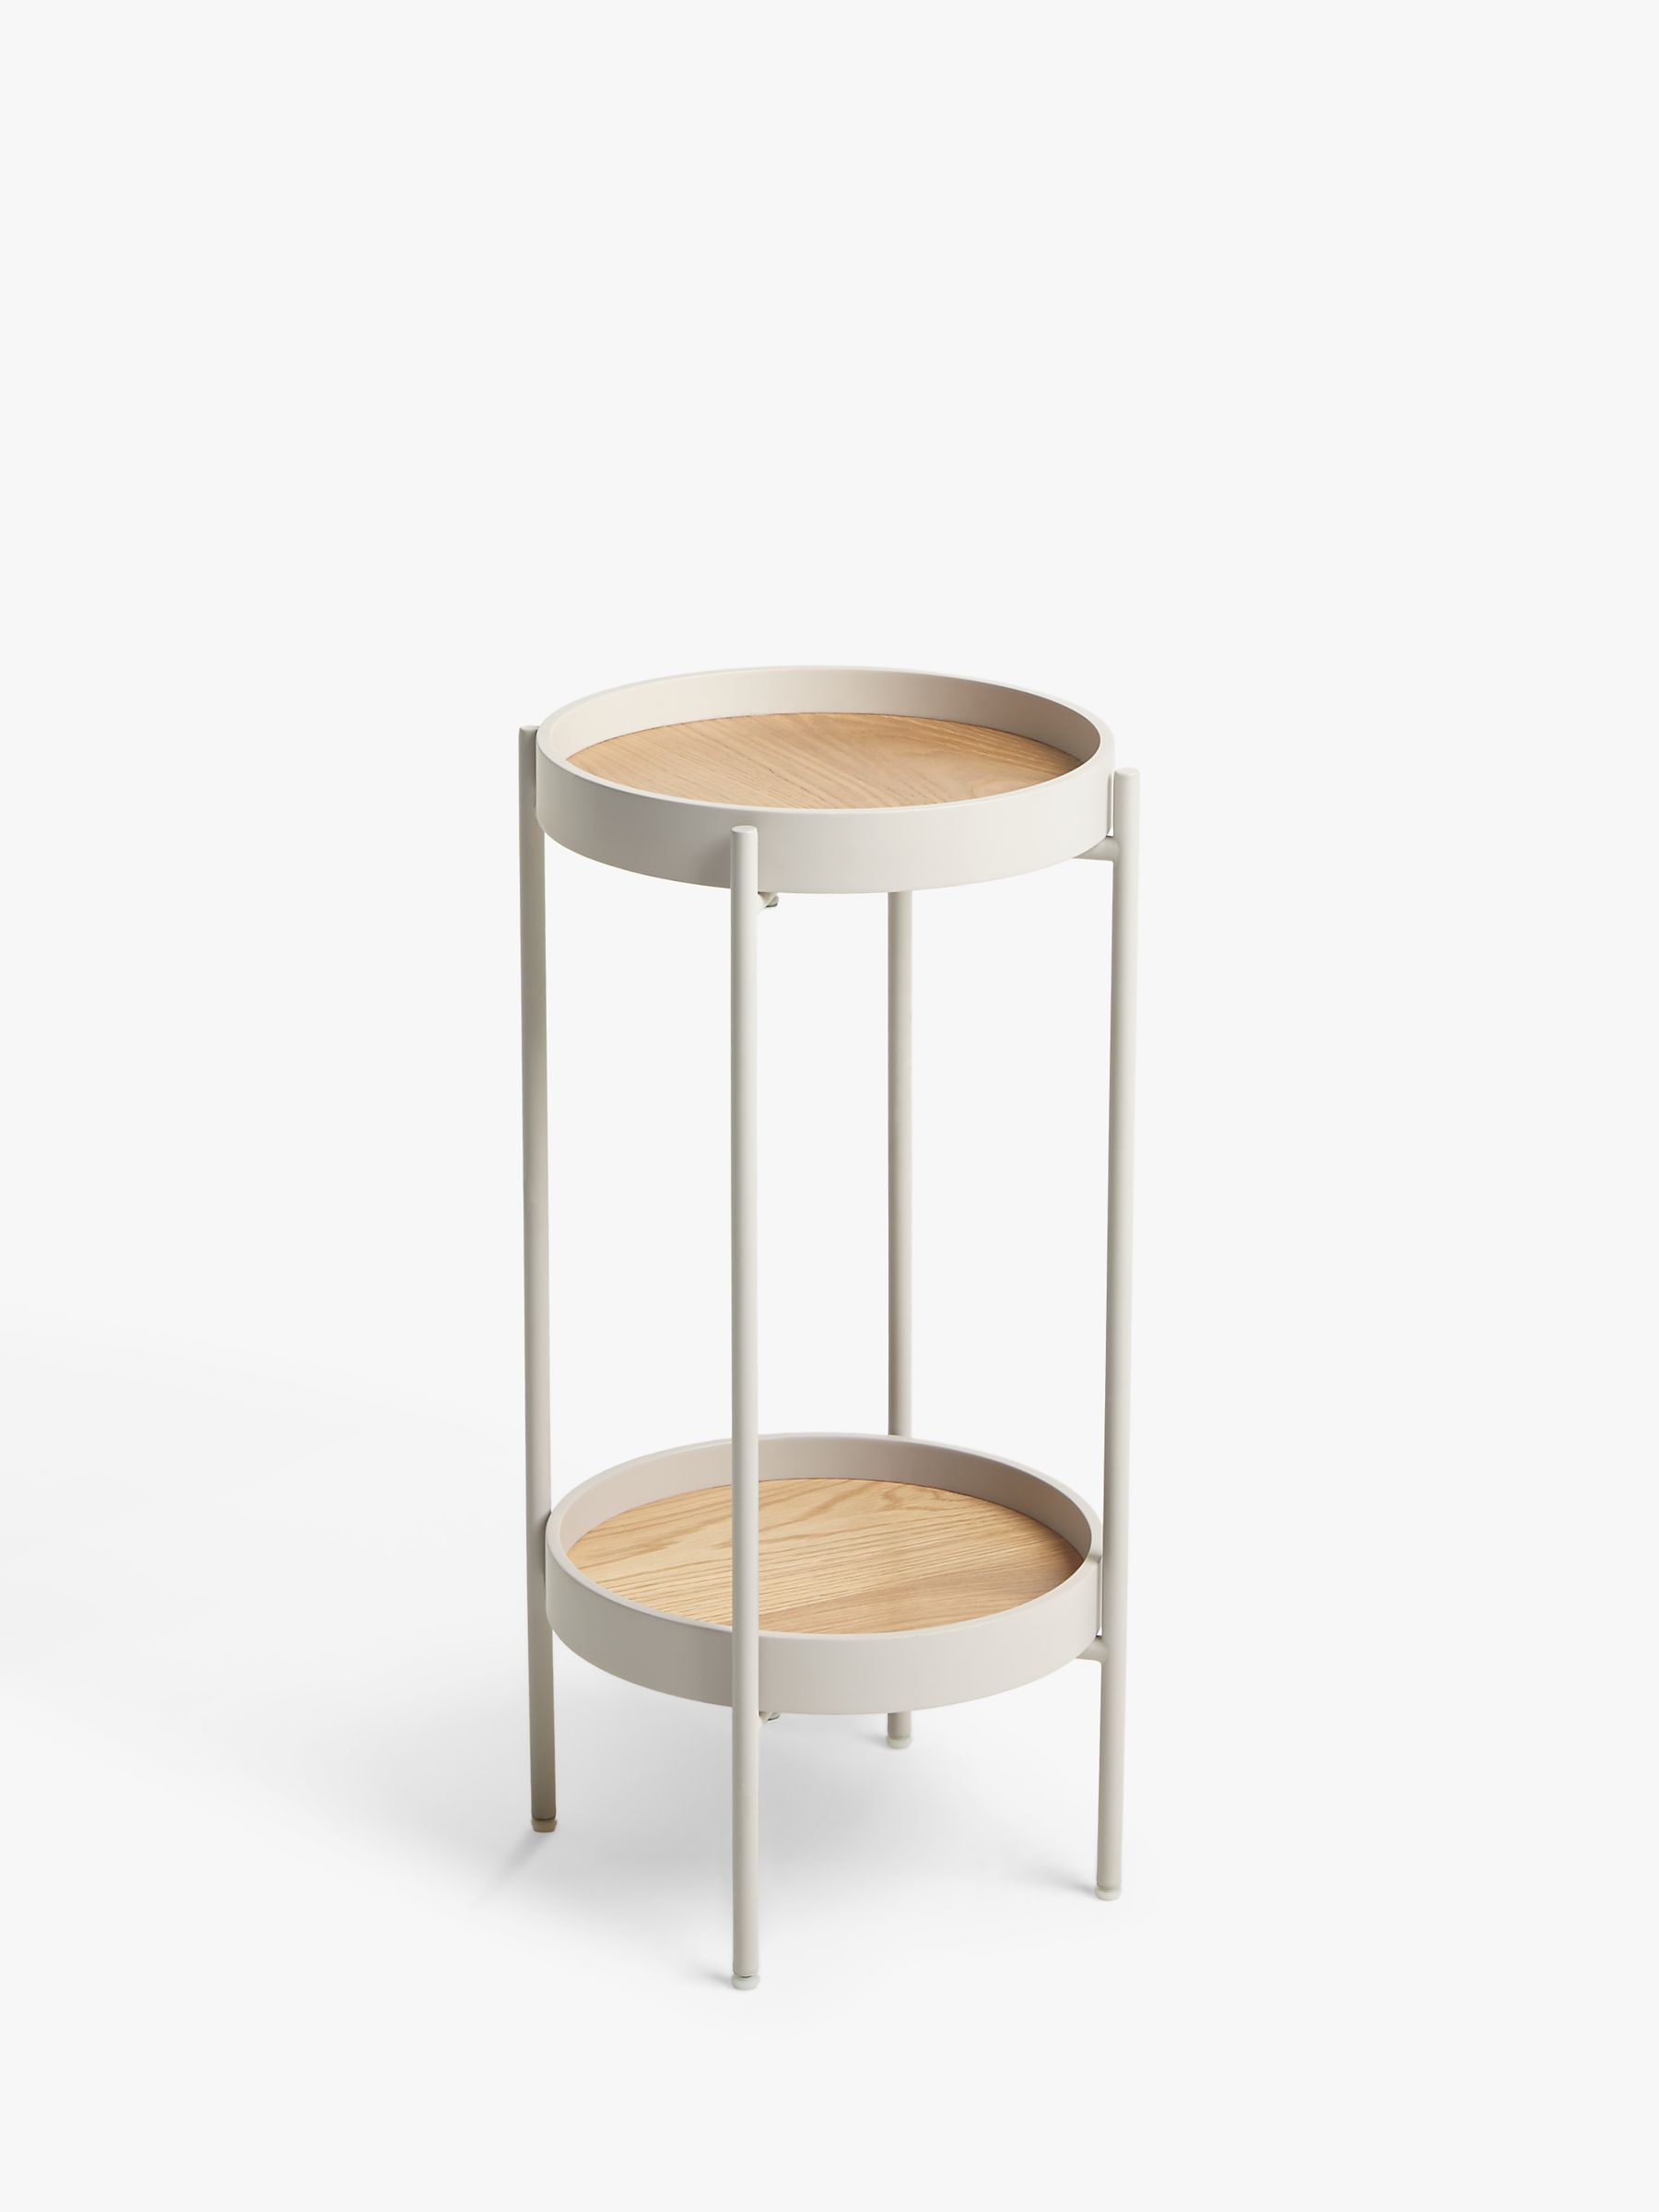 Side Tables John Lewis Partners, Small Side Tables For Living Room Uk